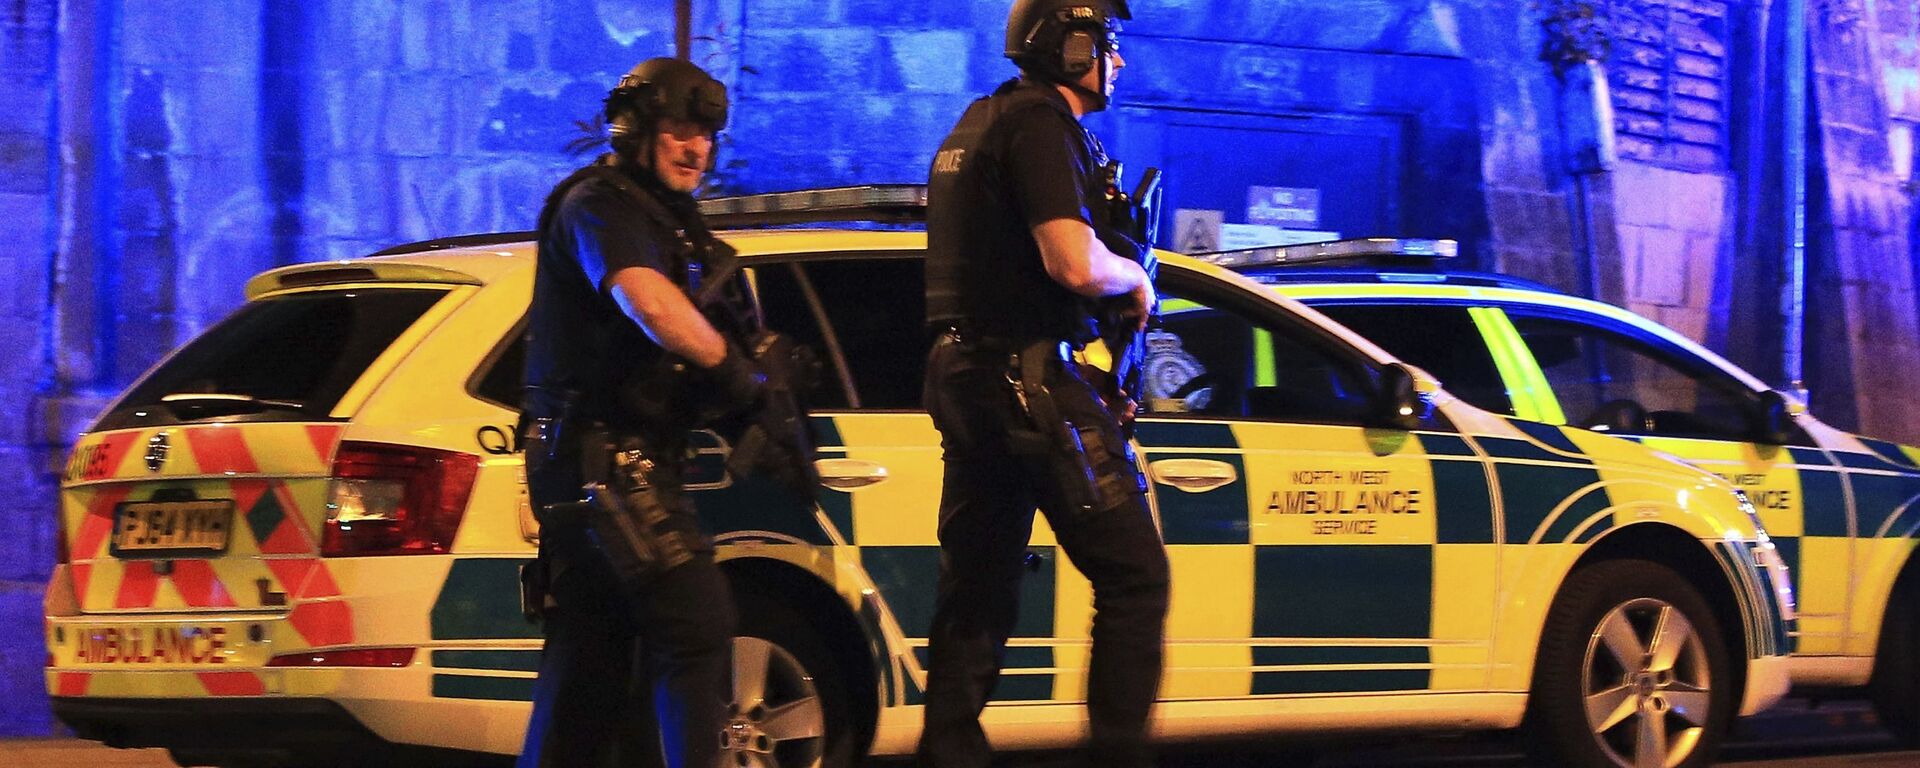 Armed police work at Manchester Arena after reports of an explosion at the venue during an Ariana Grande gig in Manchester, England Monday, May 22, 2017. - Sputnik International, 1920, 23.05.2017